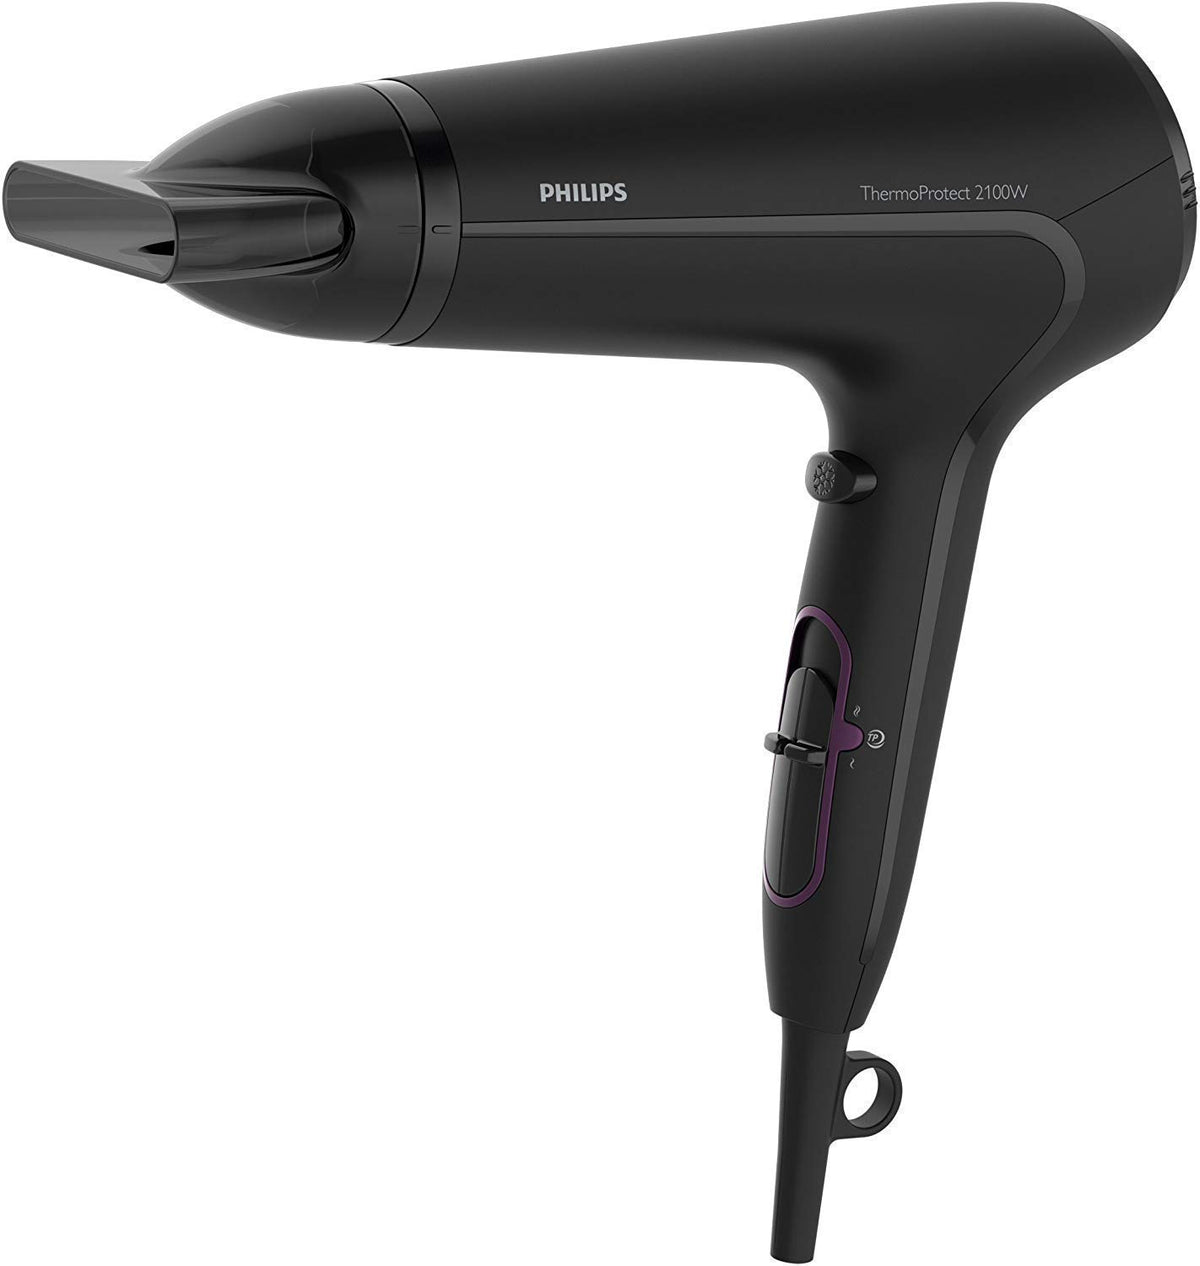 Philips ThermoProtect Hairdryer-HP8230/03